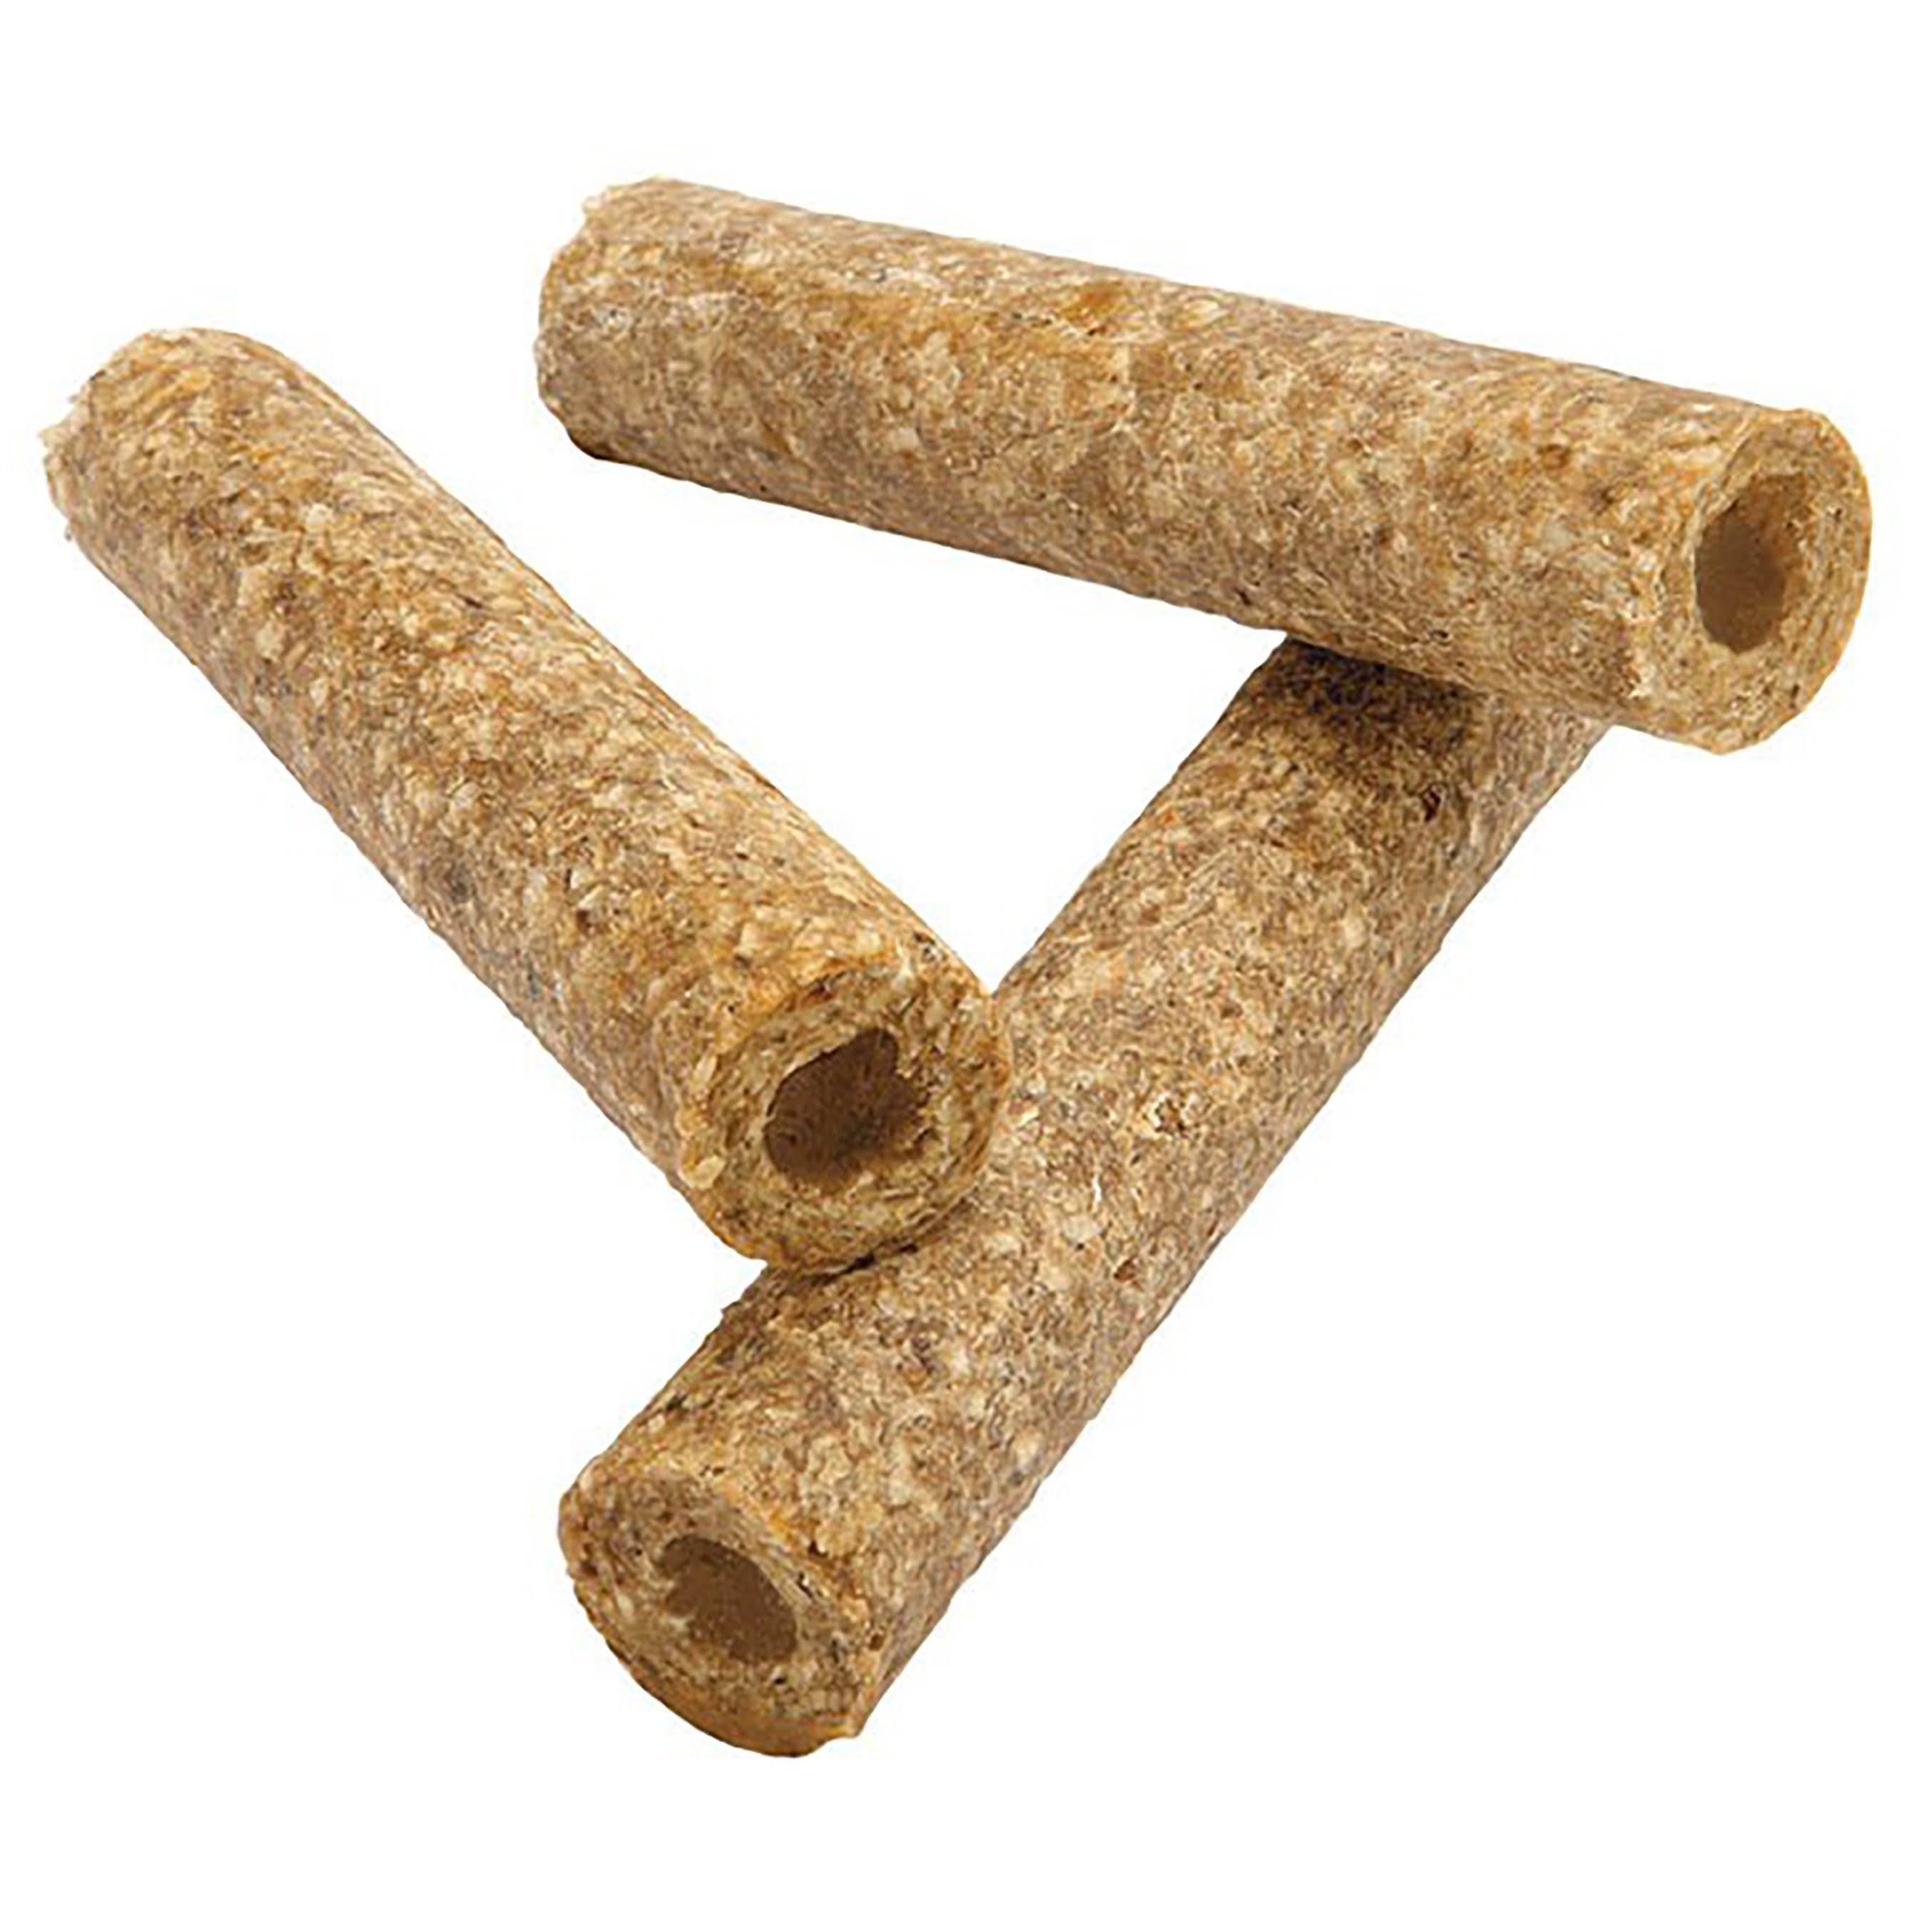 Redbarn Pet Products Beef Filled Munchie Retriever Dog Treat